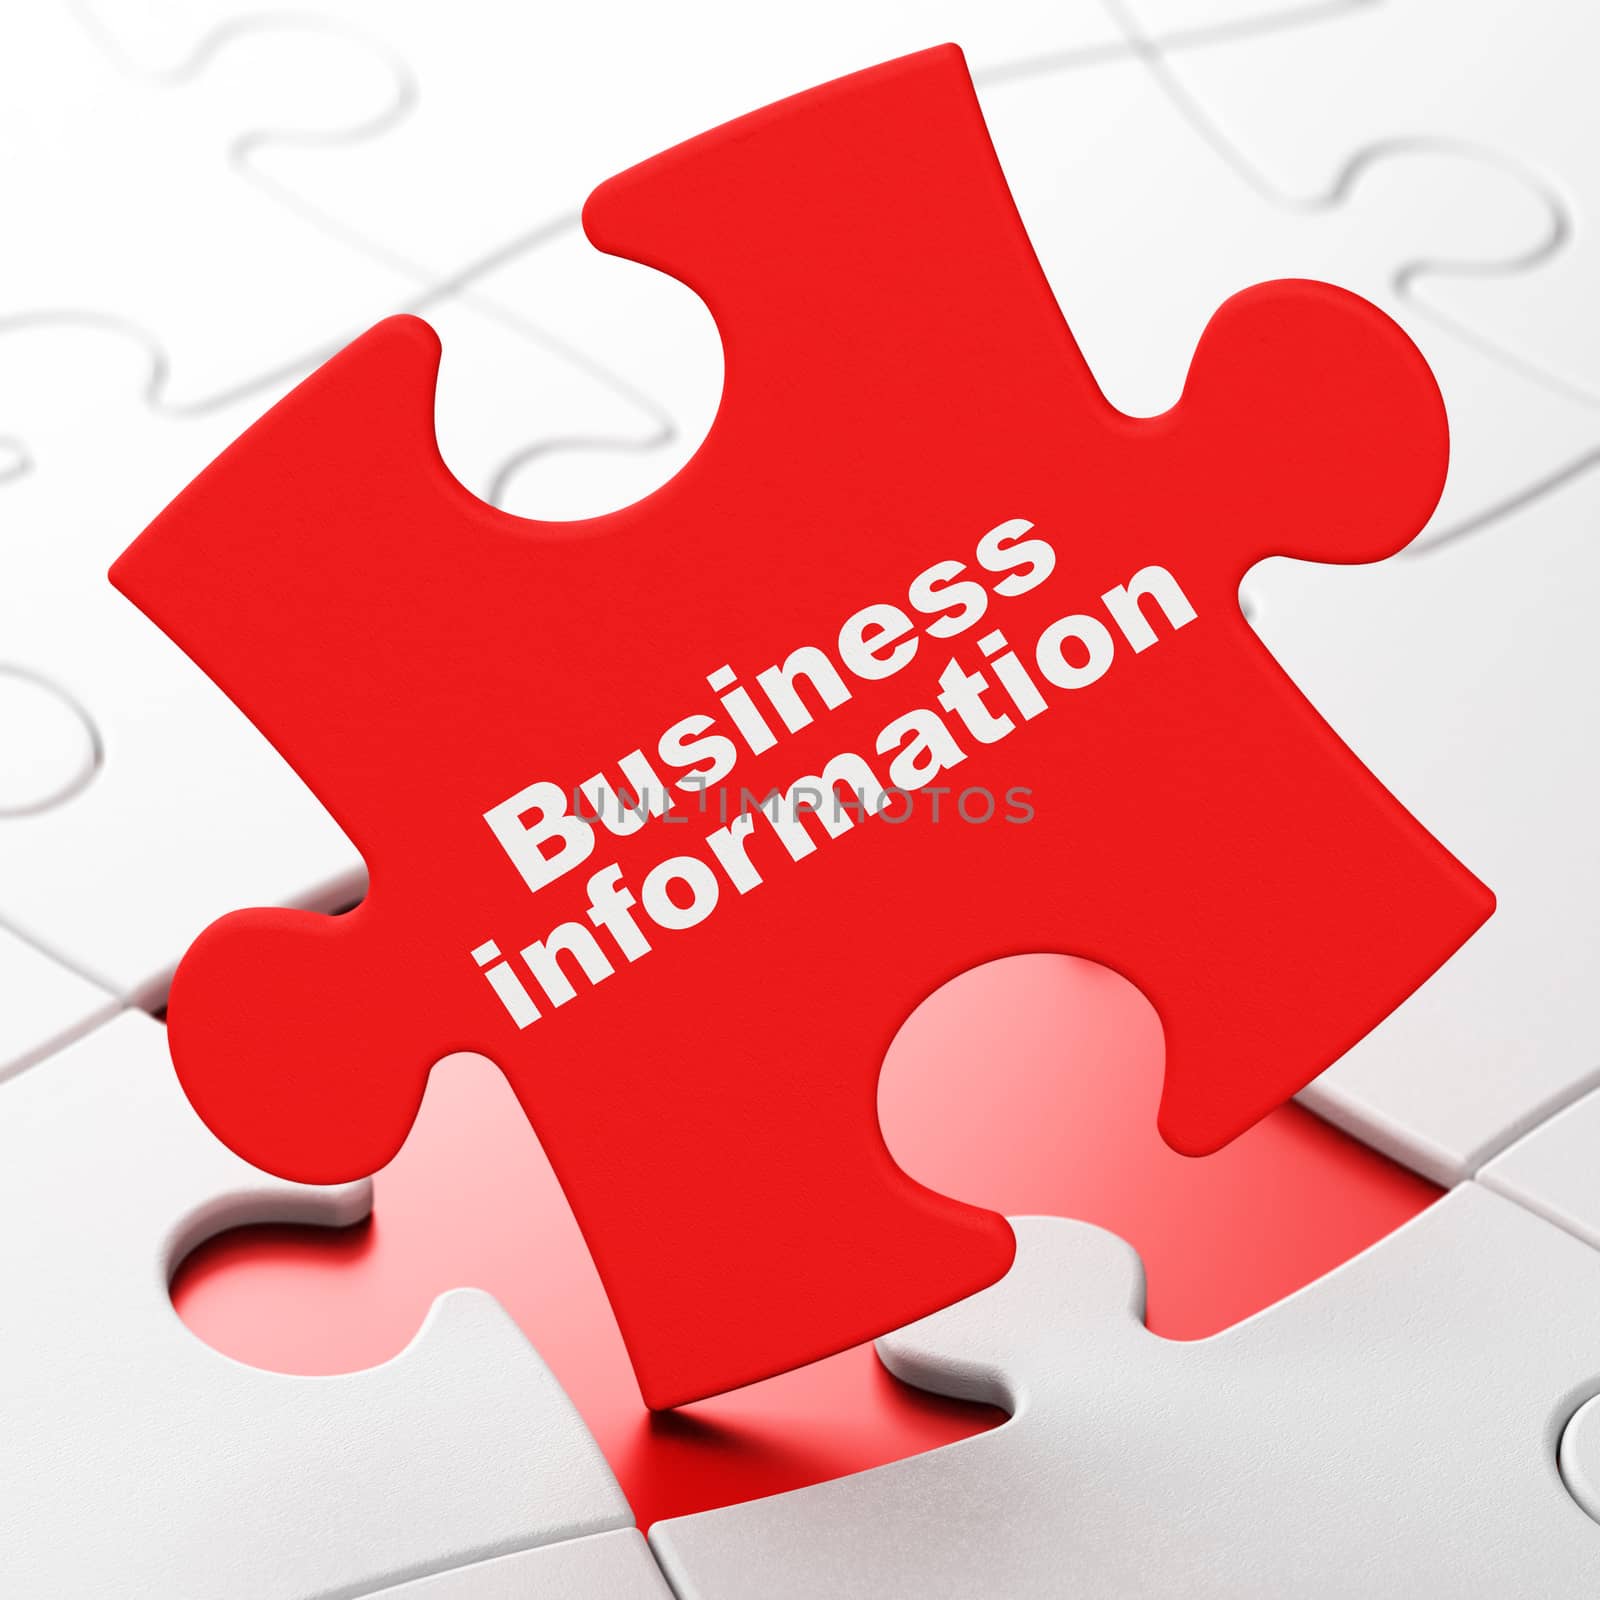 Finance concept: Business Information on puzzle background by maxkabakov